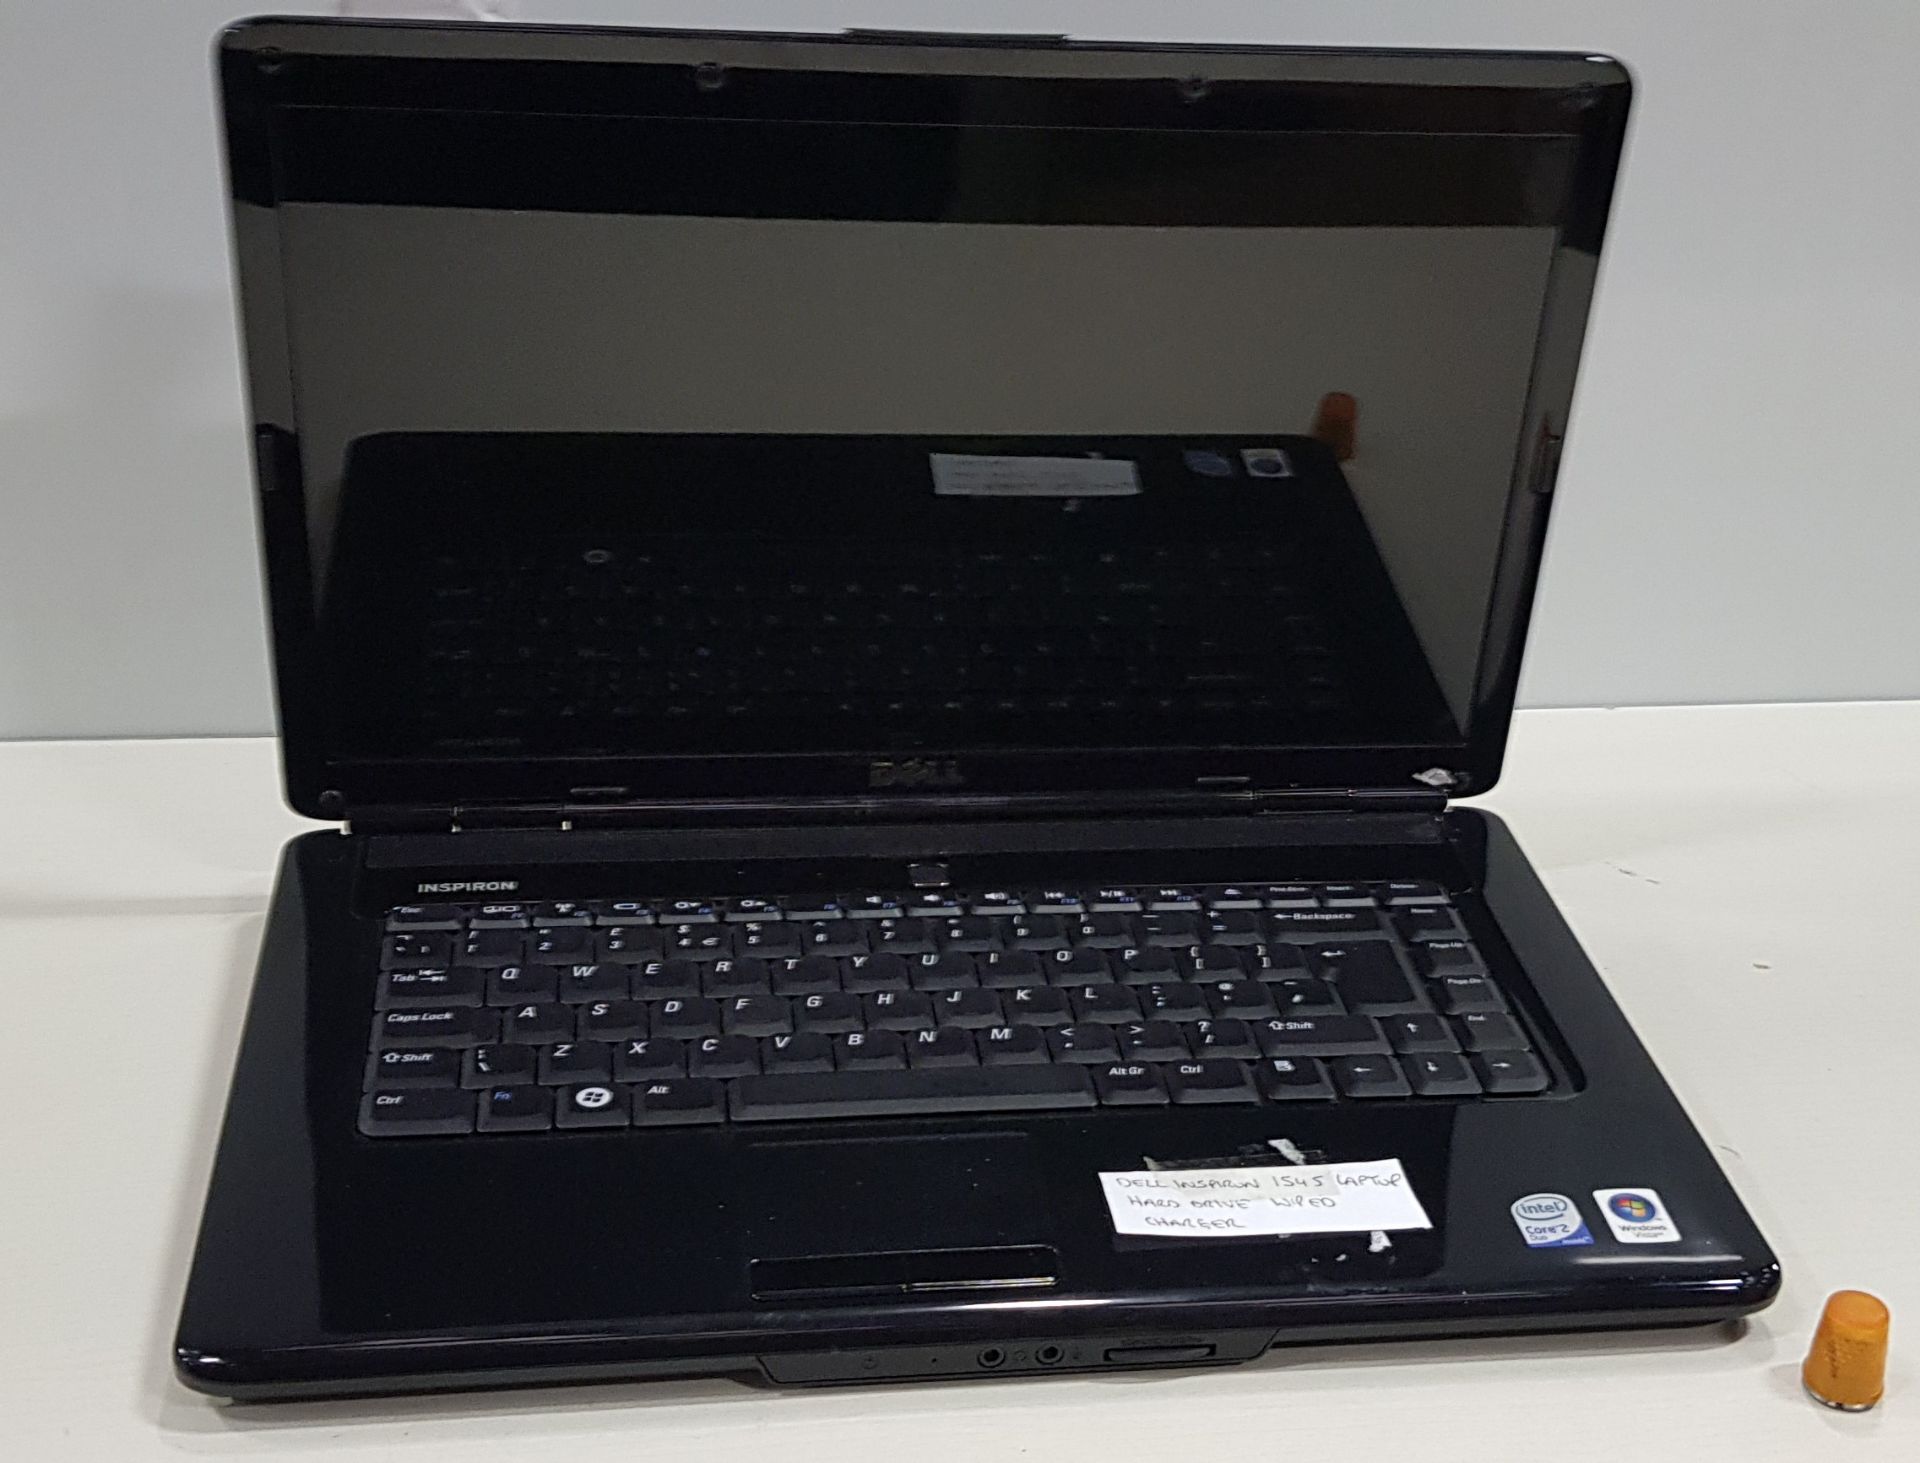 1 X DELL INSPIRION LAPTOP WITH CHARGER (HARD DRIVE WIPED NO O/S NOTE DOES NOT POWER UP )